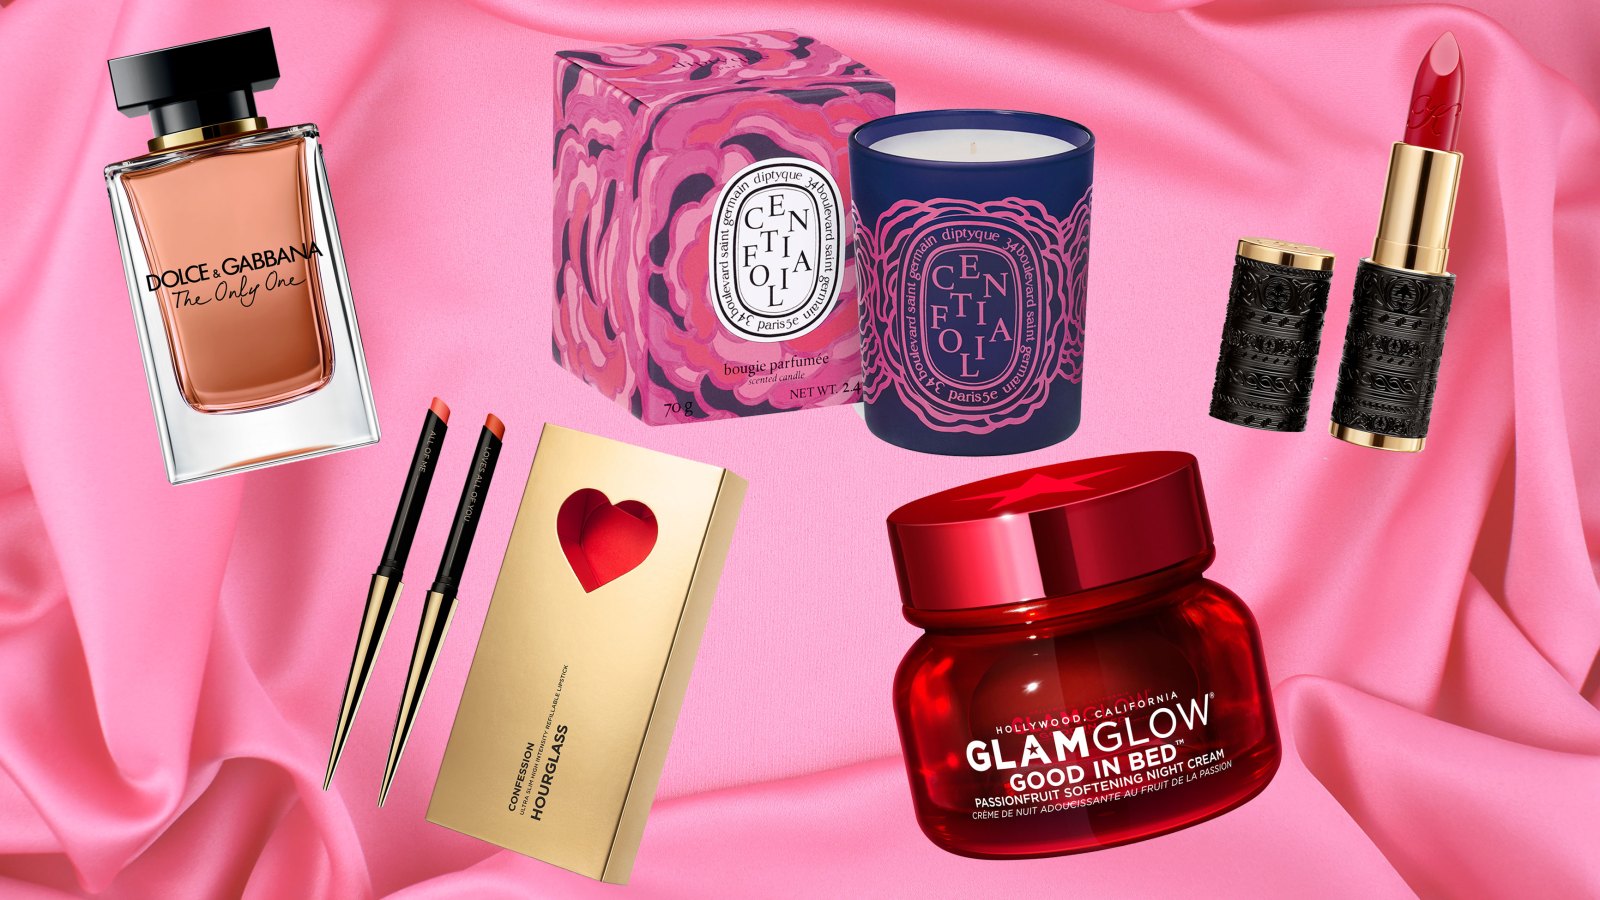 Valentine's Day Gift Guide 2019: Beauty and Fashion Ideas for the Lady in Your Life